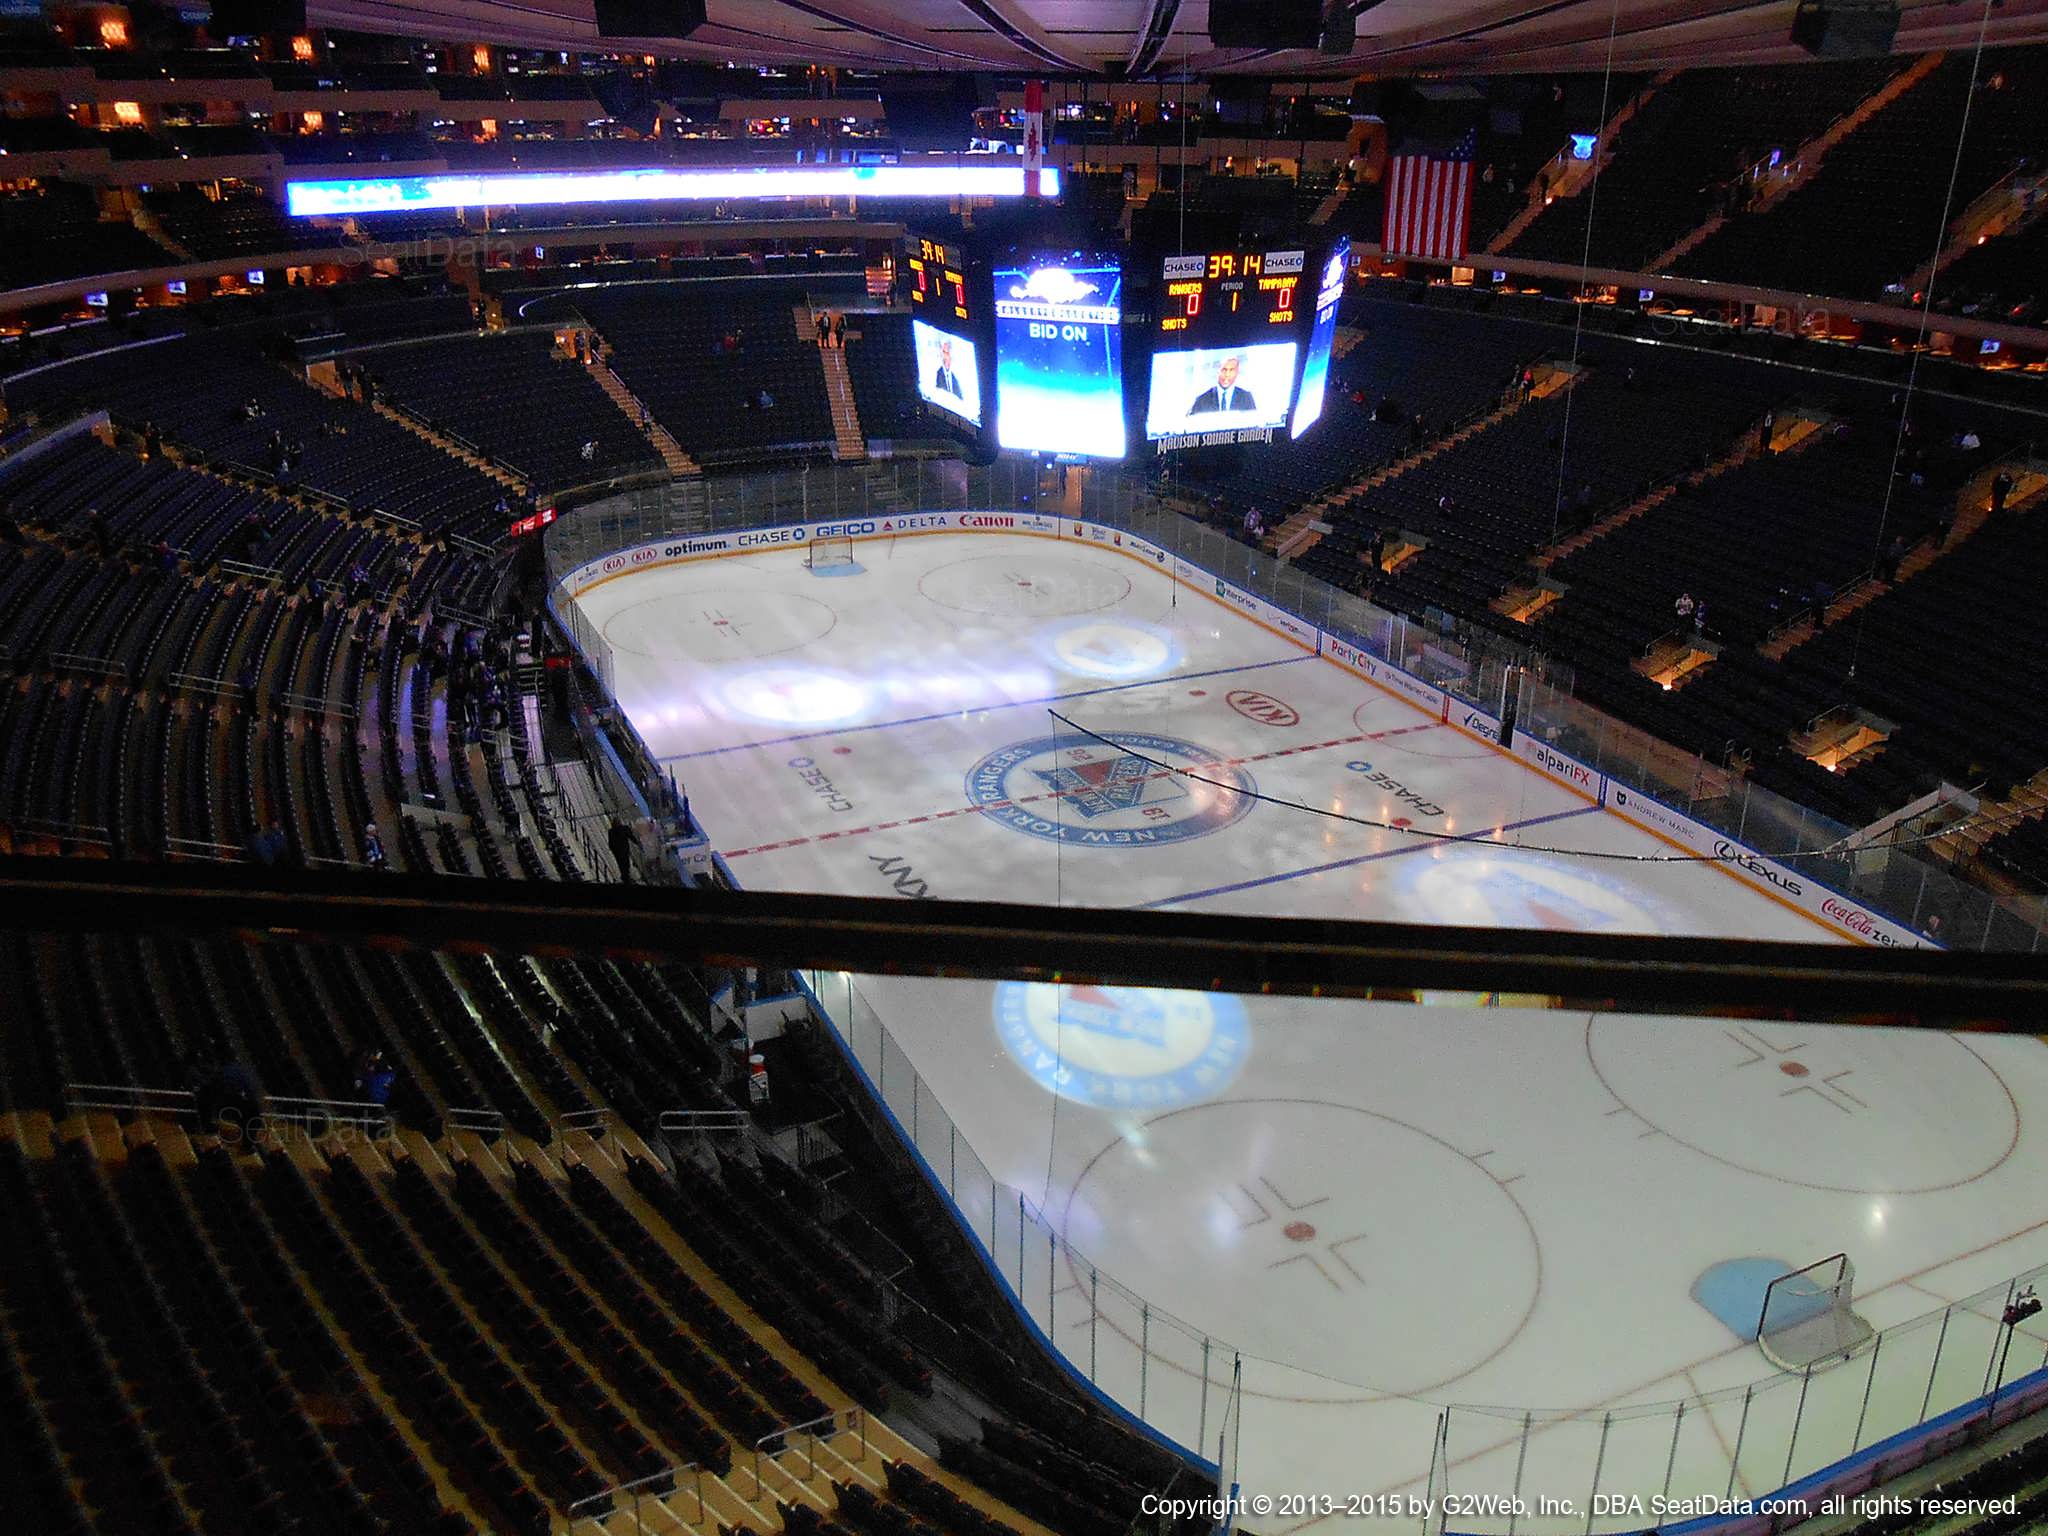 Section 318 At Madison Square Garden Rateyourseats Com